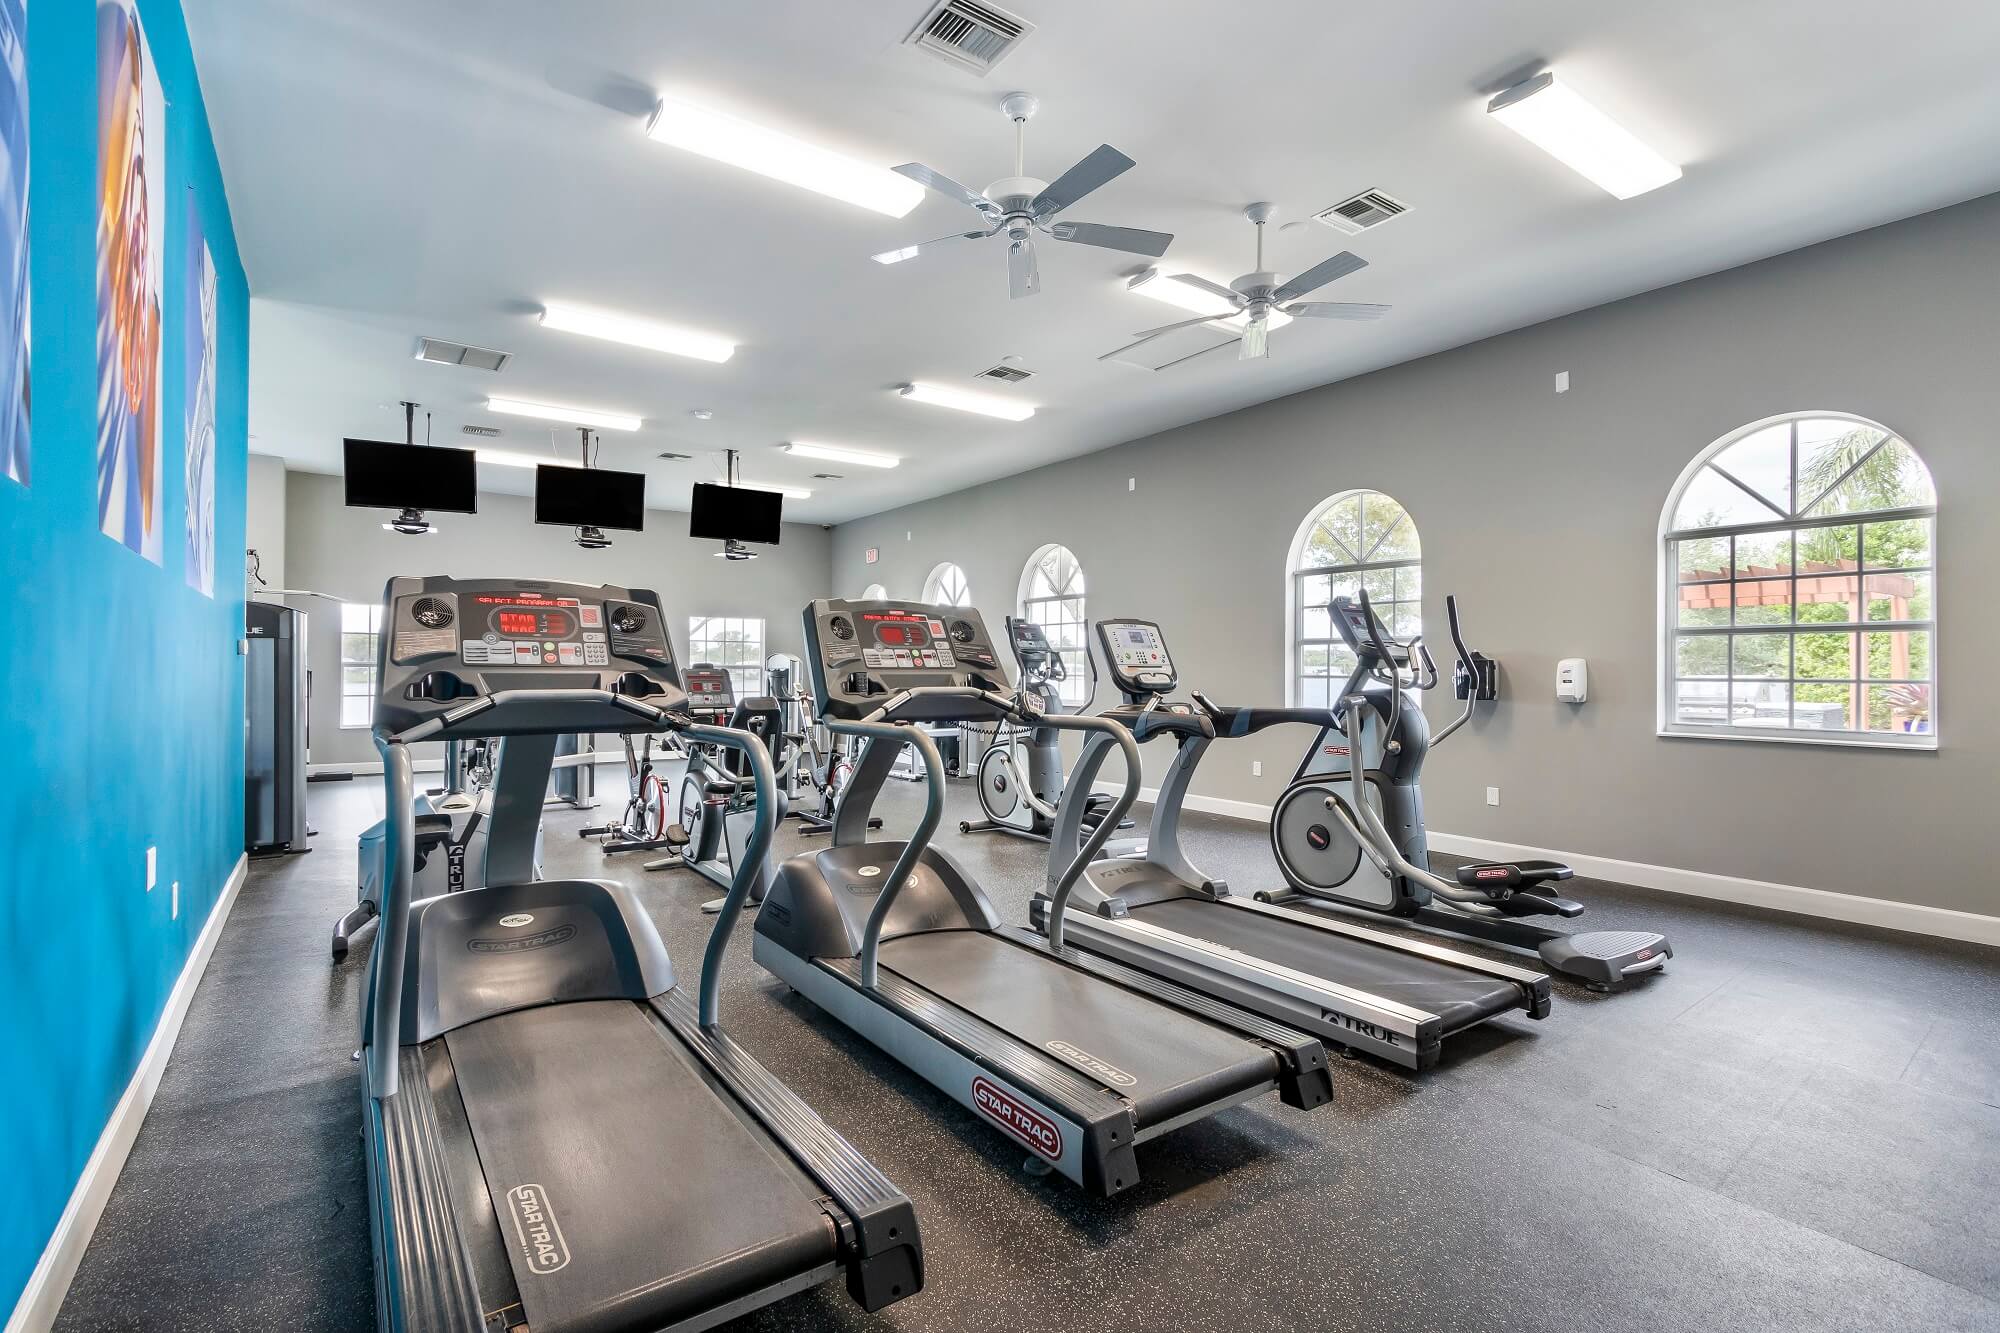 fitness center with cardio training equipment. Tvs hanging from the ceiling